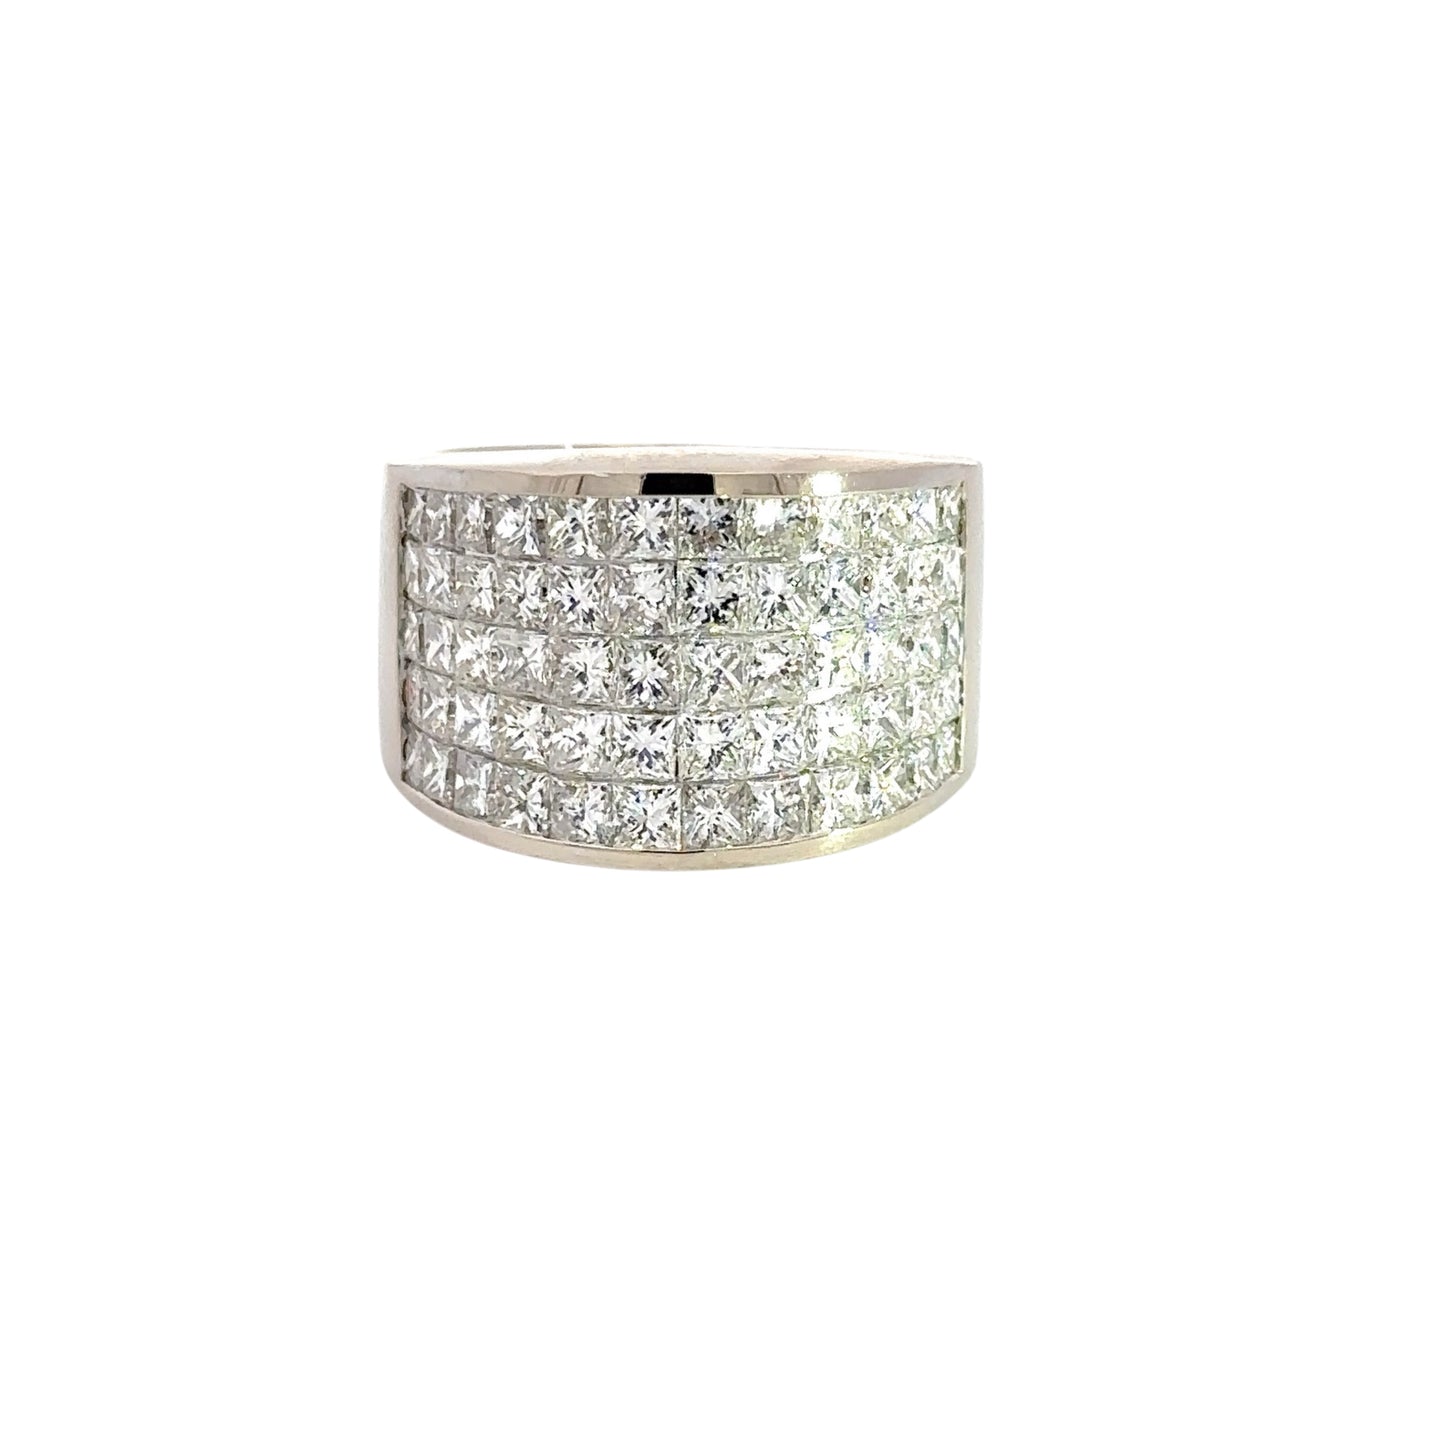 Front of ring with 5 rows of 11 princess-cut diamonds